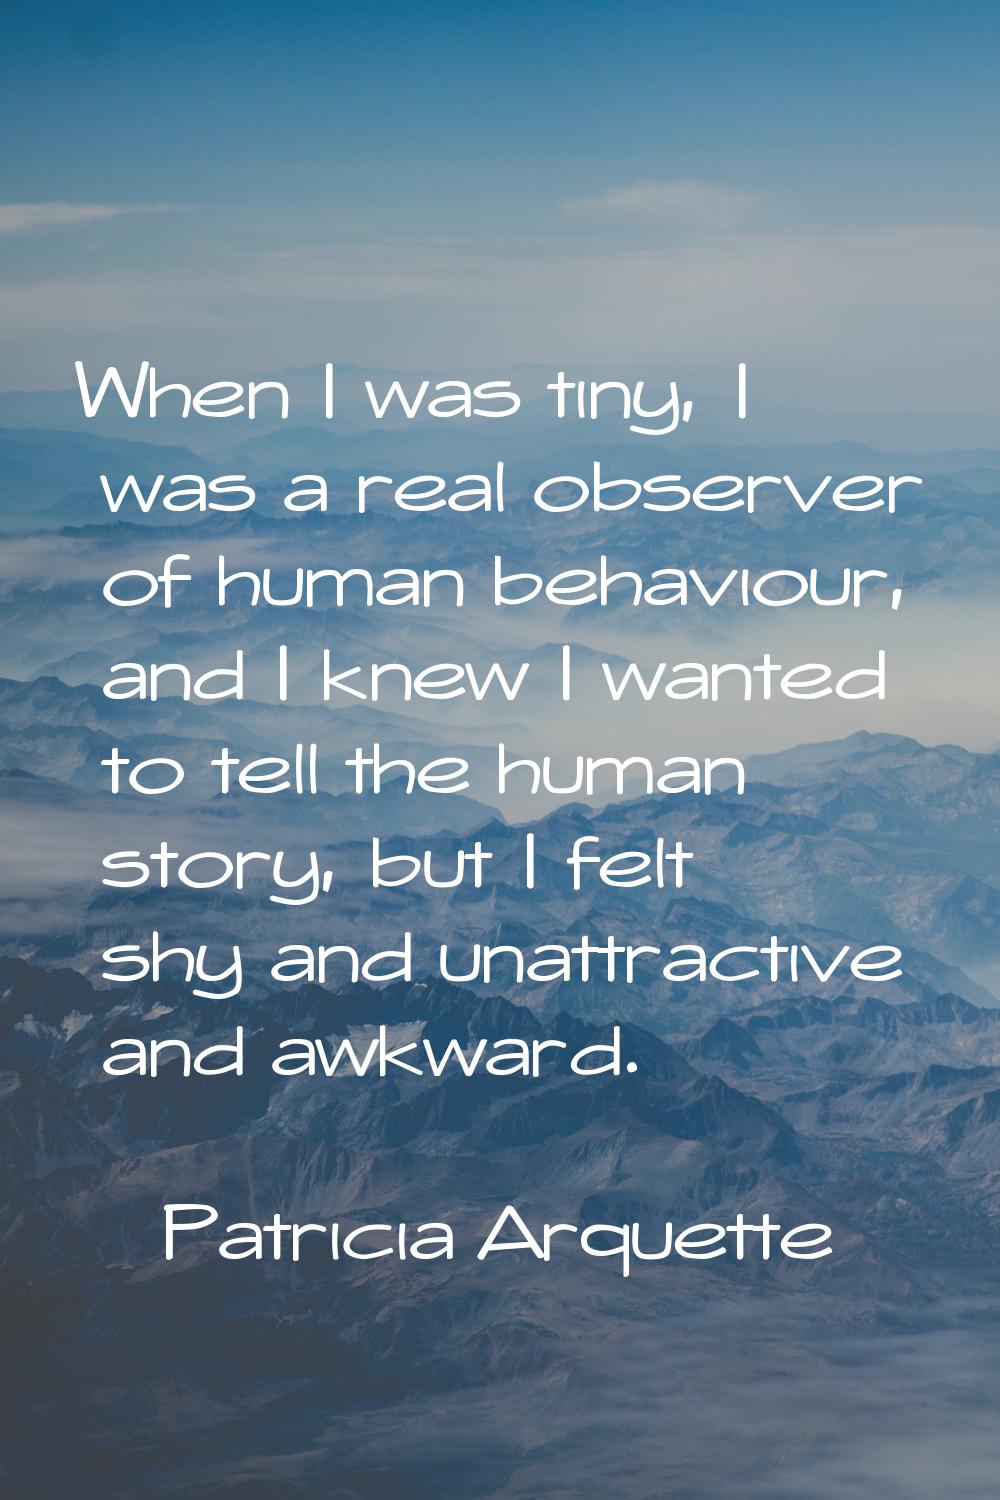 When I was tiny, I was a real observer of human behaviour, and I knew I wanted to tell the human st